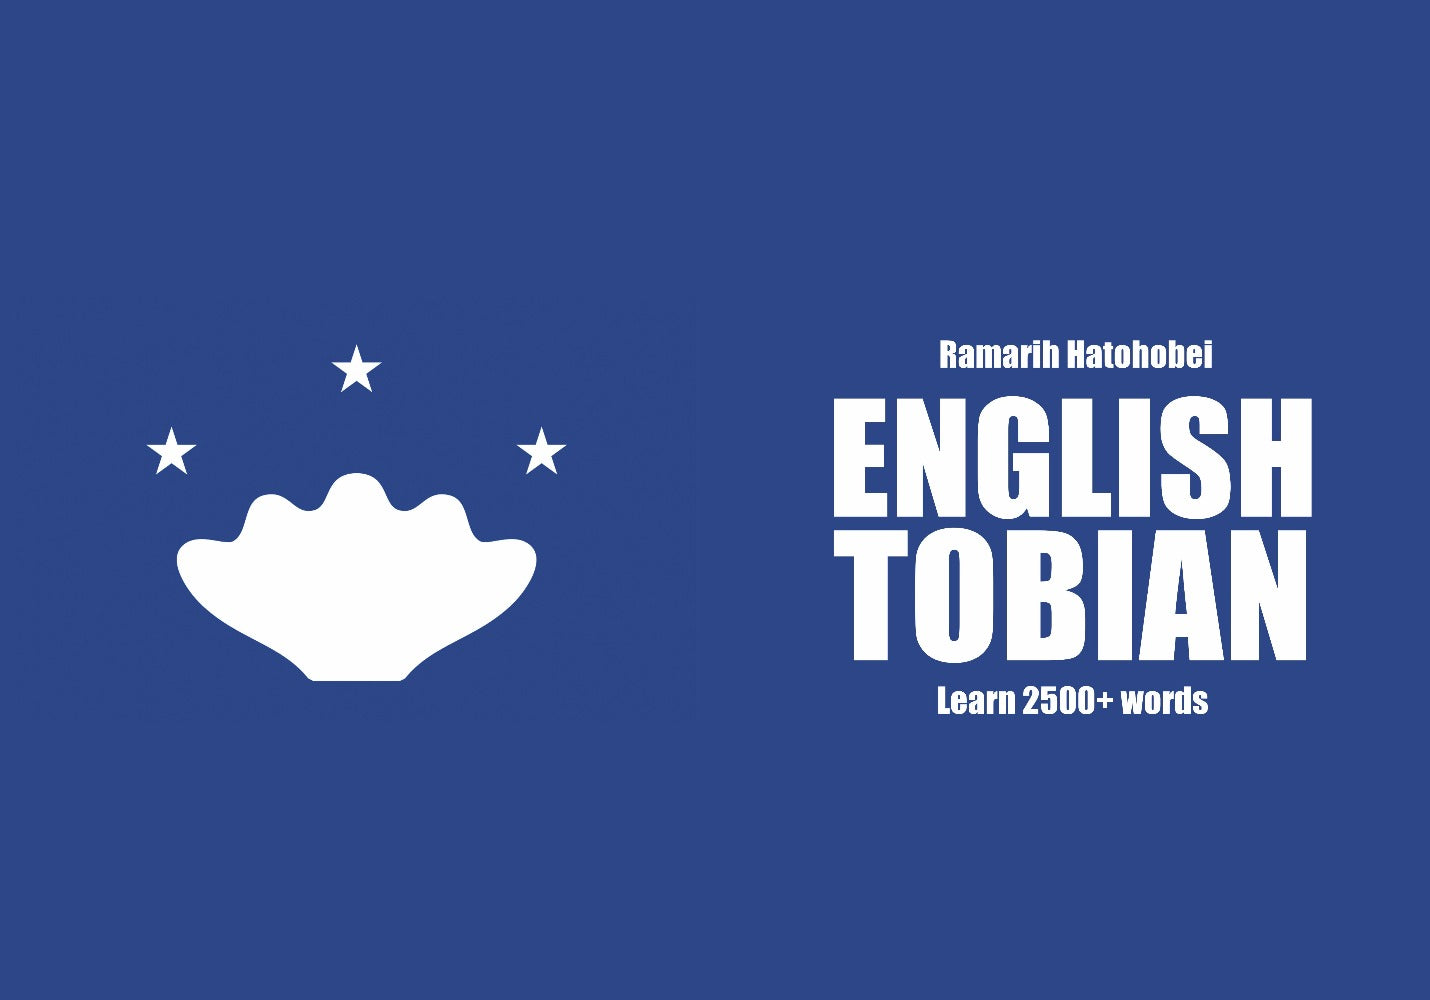 Tobian language learning notebook cover